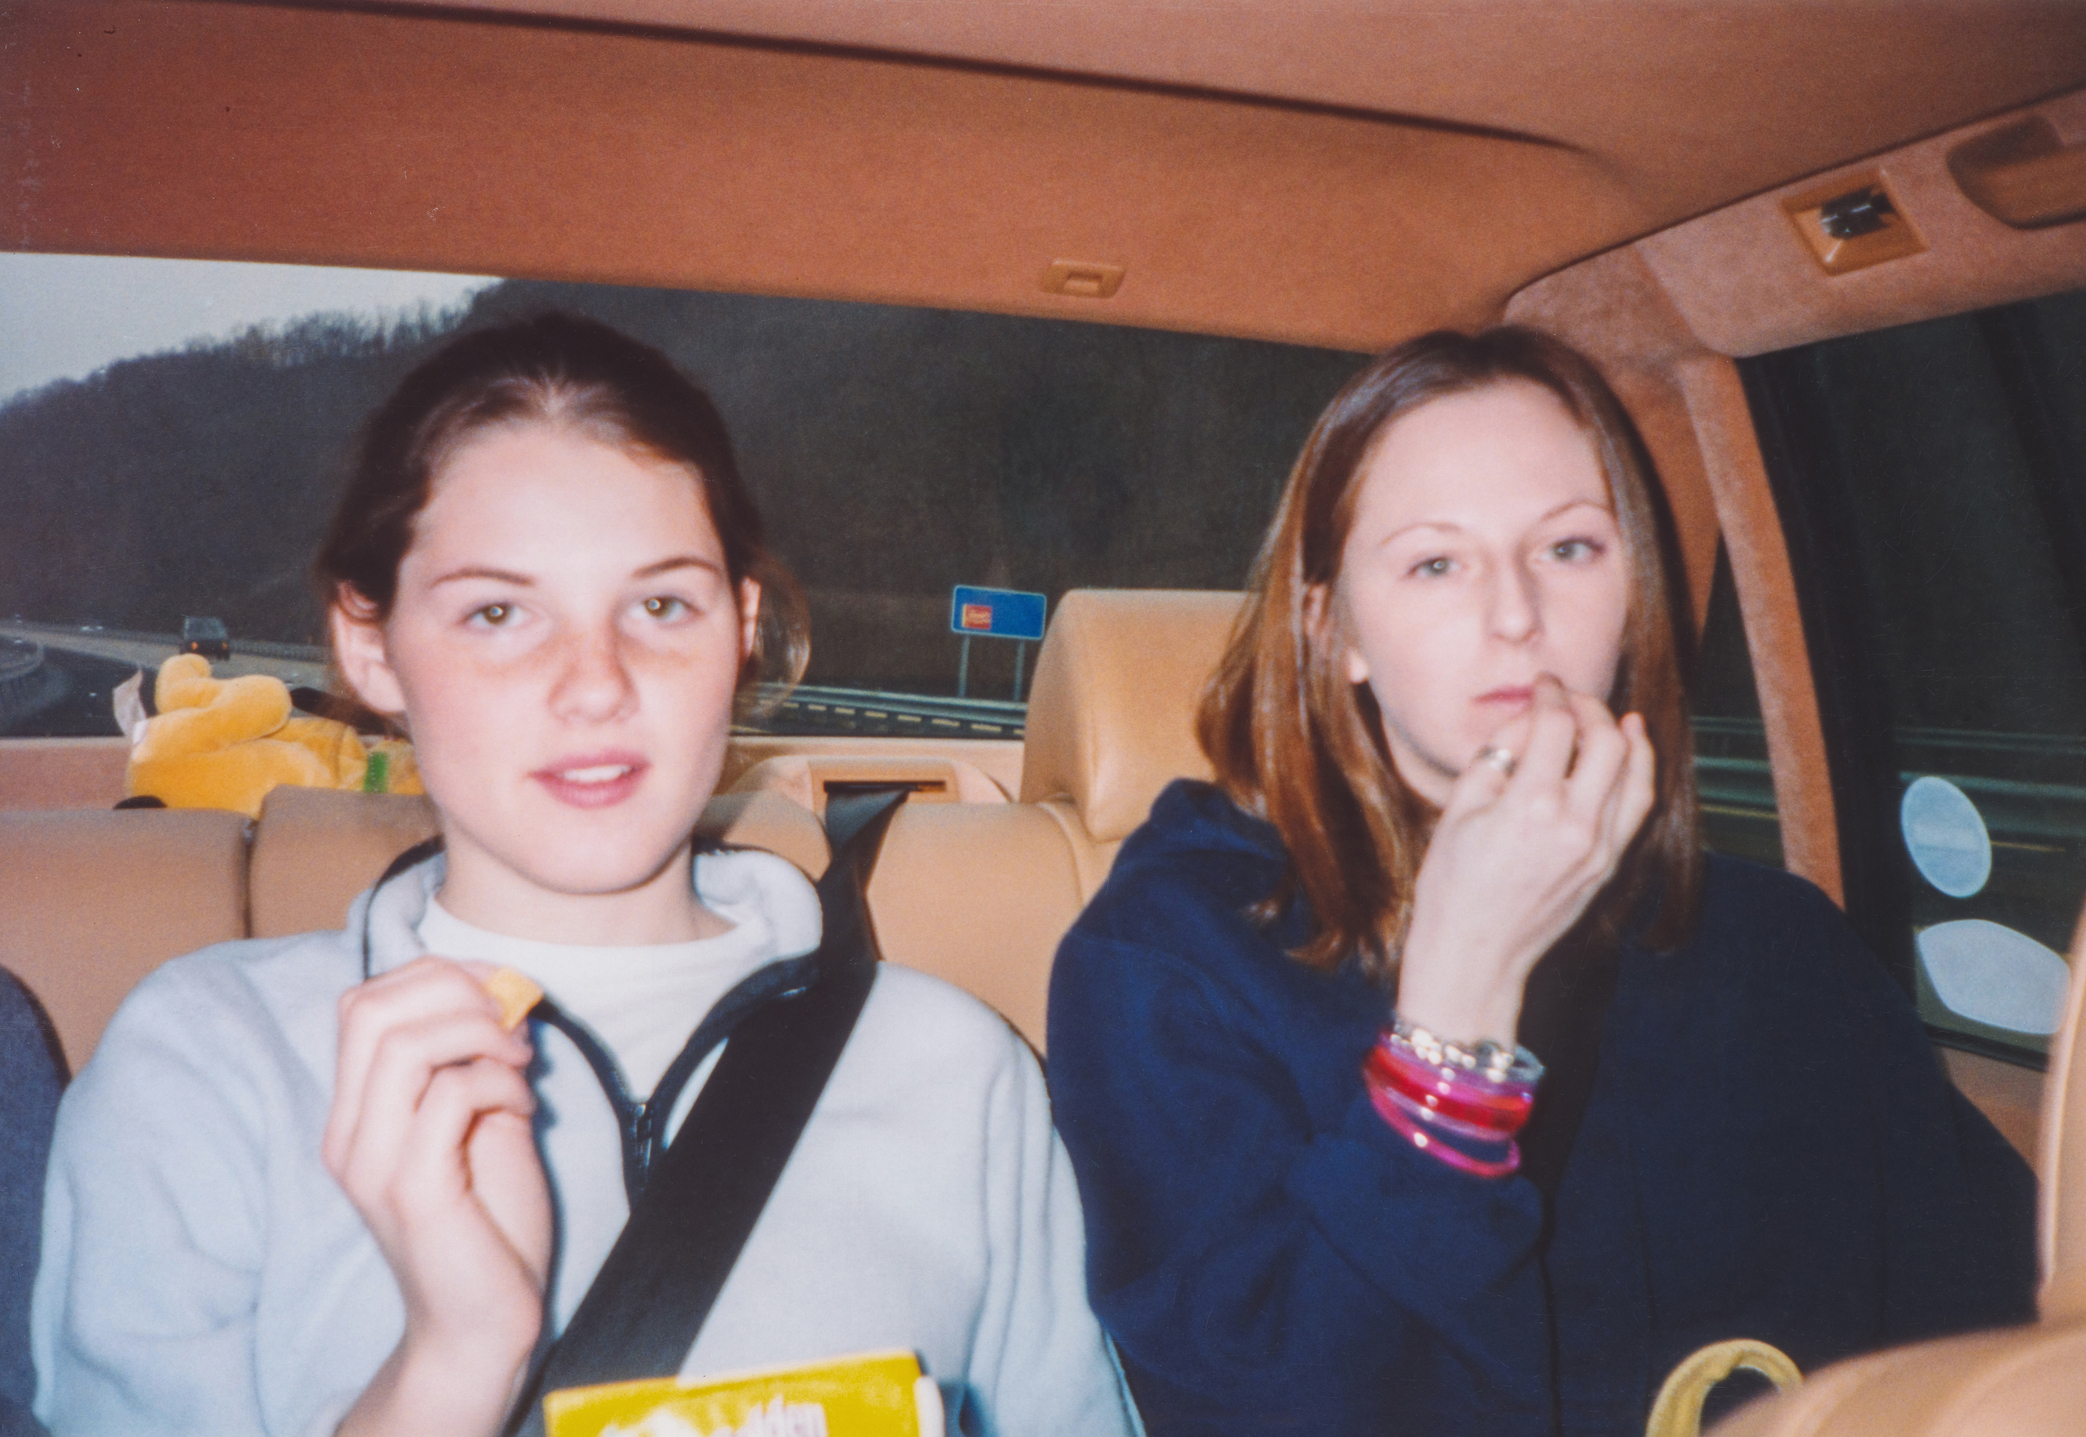 Two teenage girls are sitting in the back of a car eating snacks